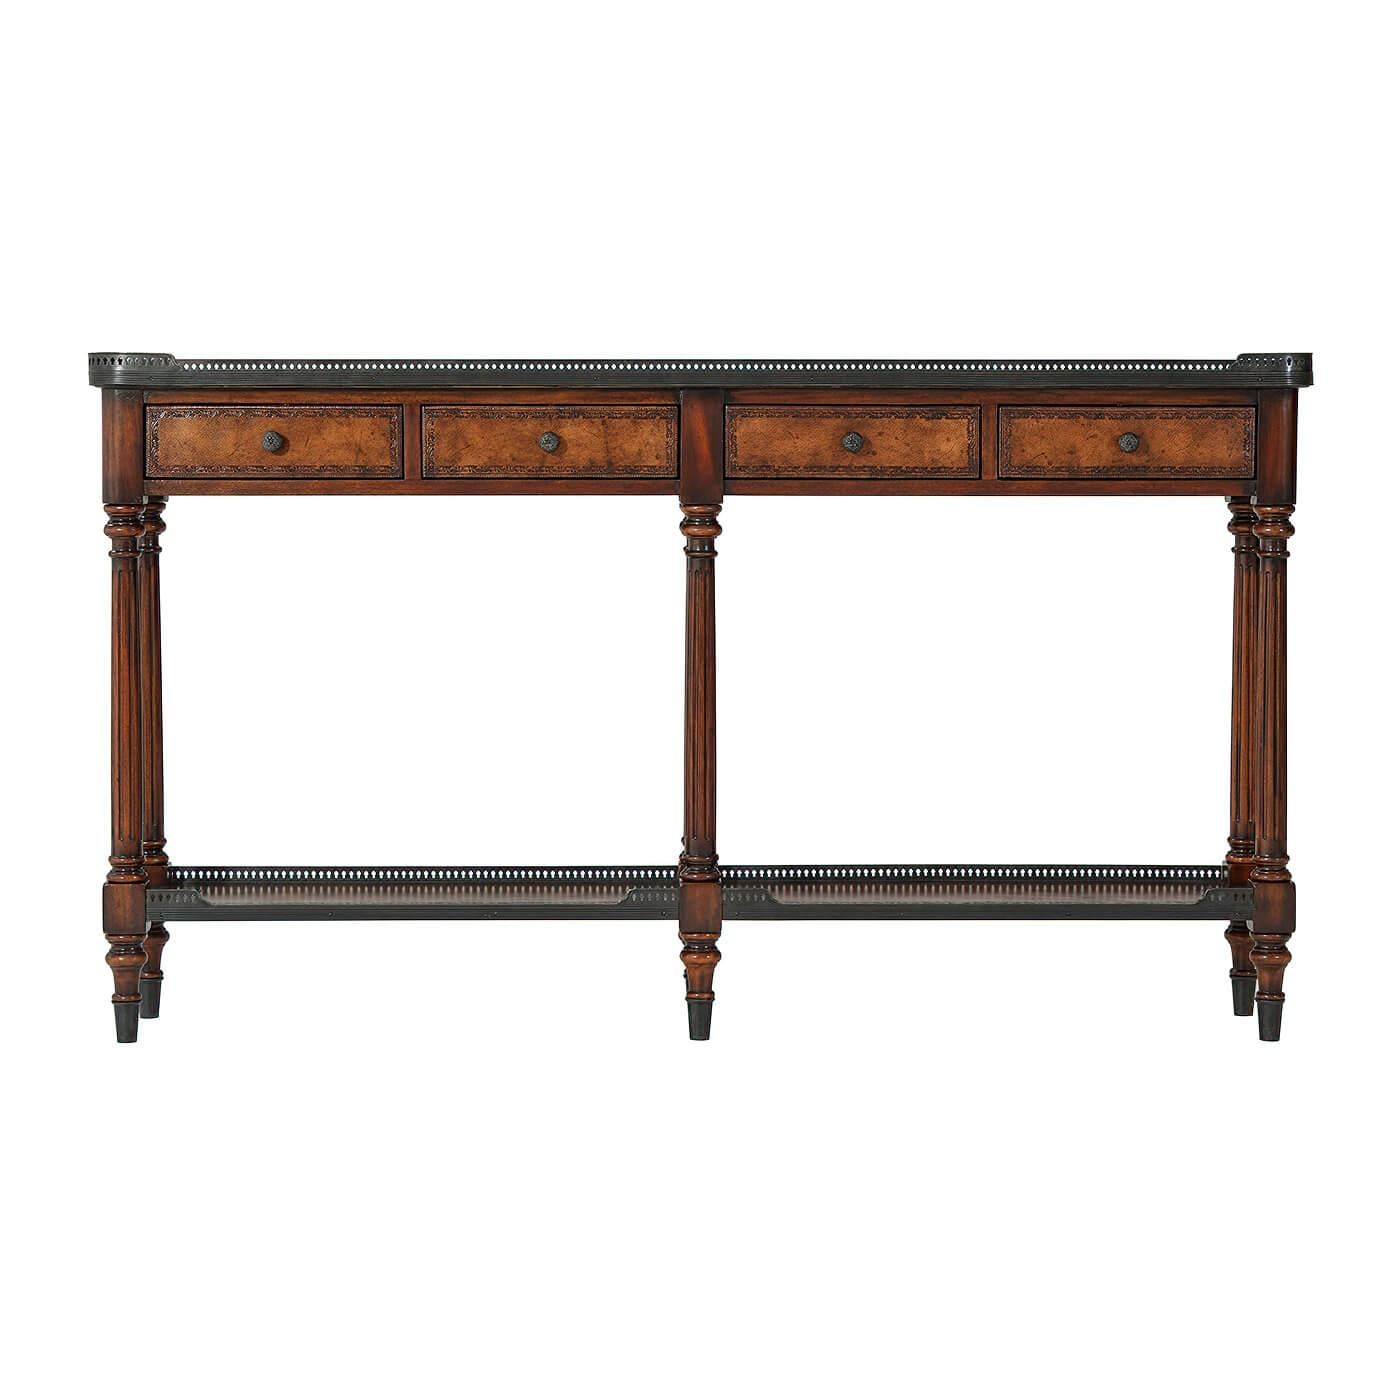 A Louis XVI style narrow leather paneled and solid wood console table, decorated throughout with verdigris brass mounts, the galleried top above four frieze drawers on turned and fluted legs joined by a brass galleried under tier. 

Dimensions: